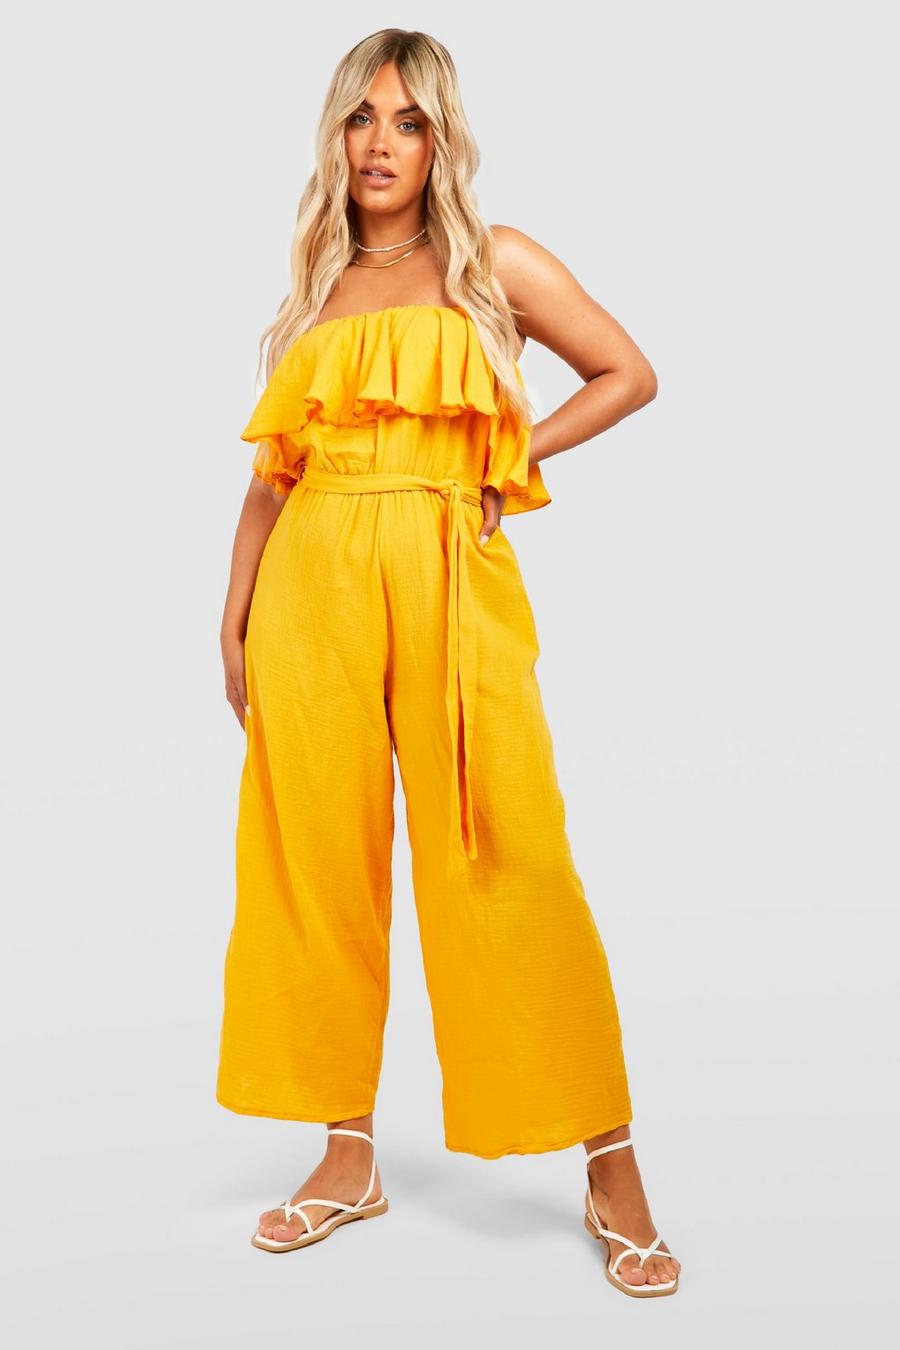 Mustard yellow Plus Frill Belted Cheesecloth Jumpsuit